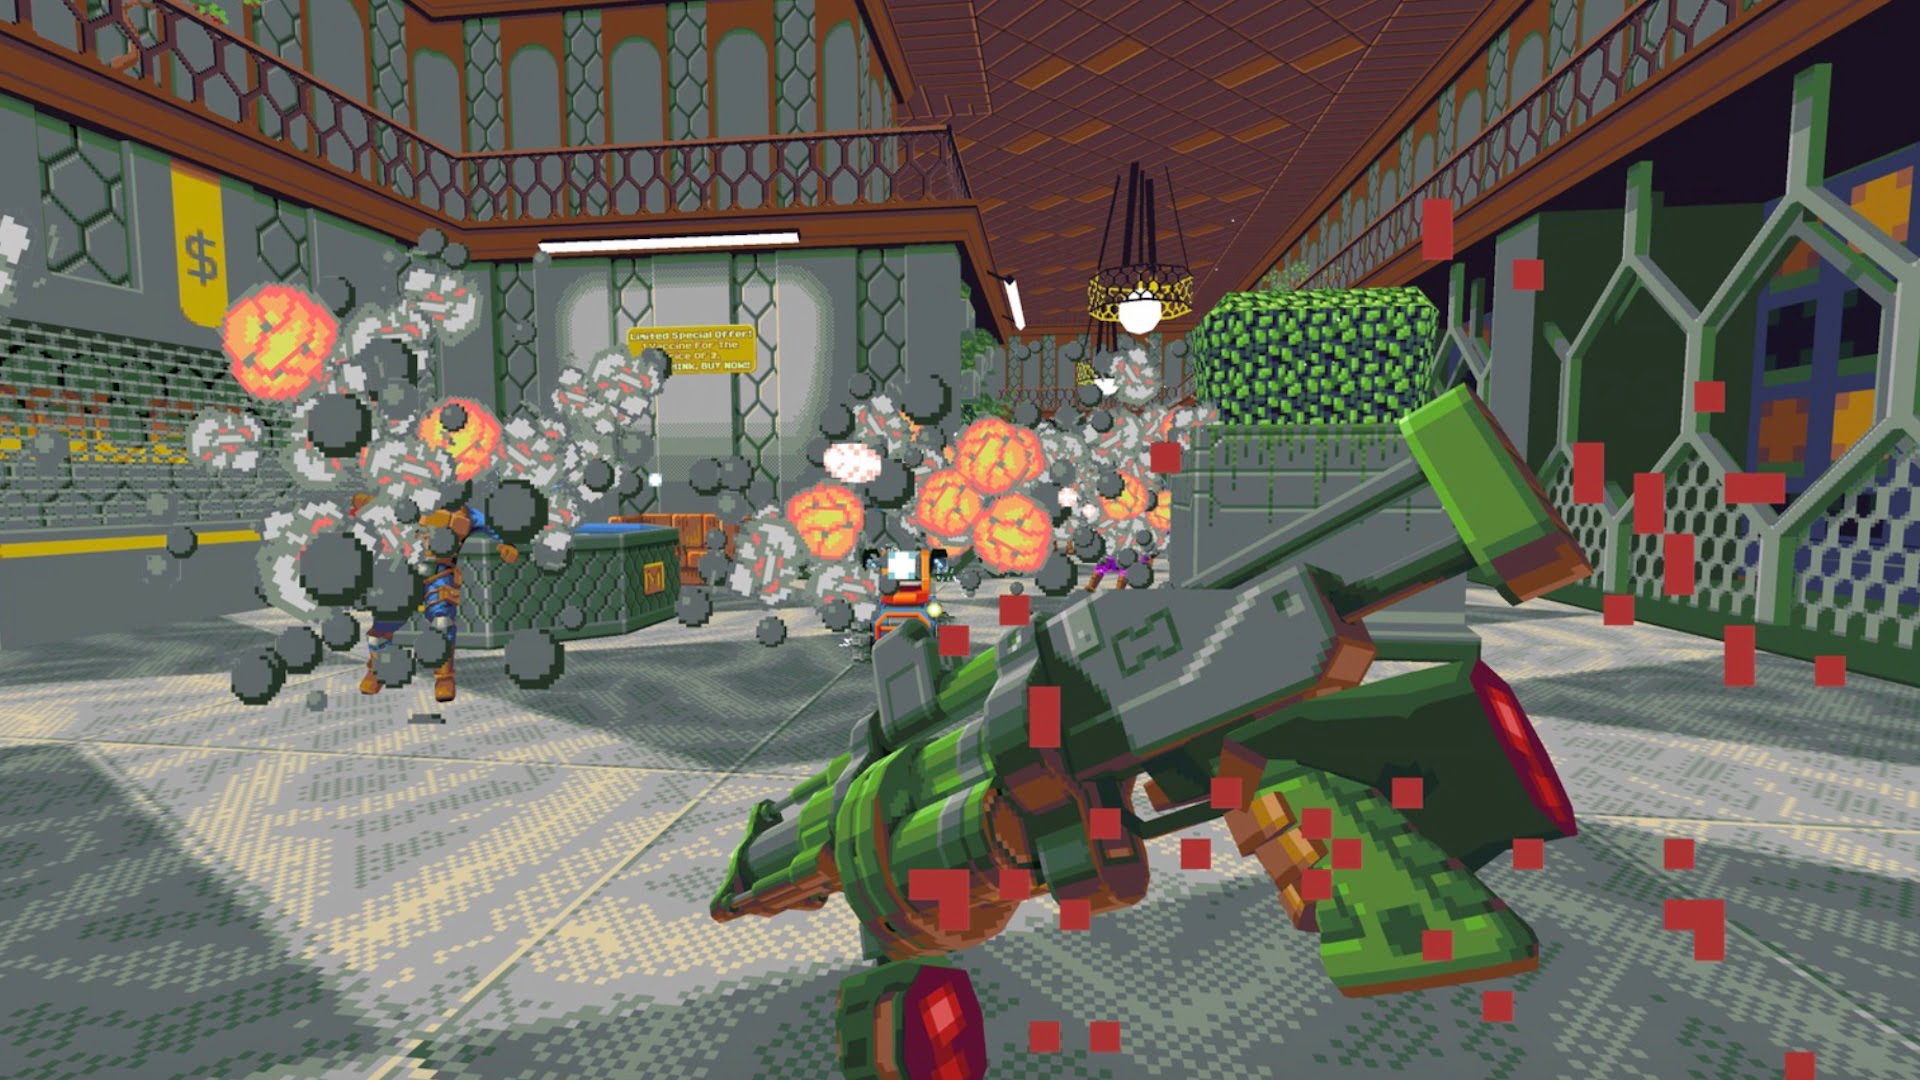 “Compound” developer is working on a new VR Retro FPS